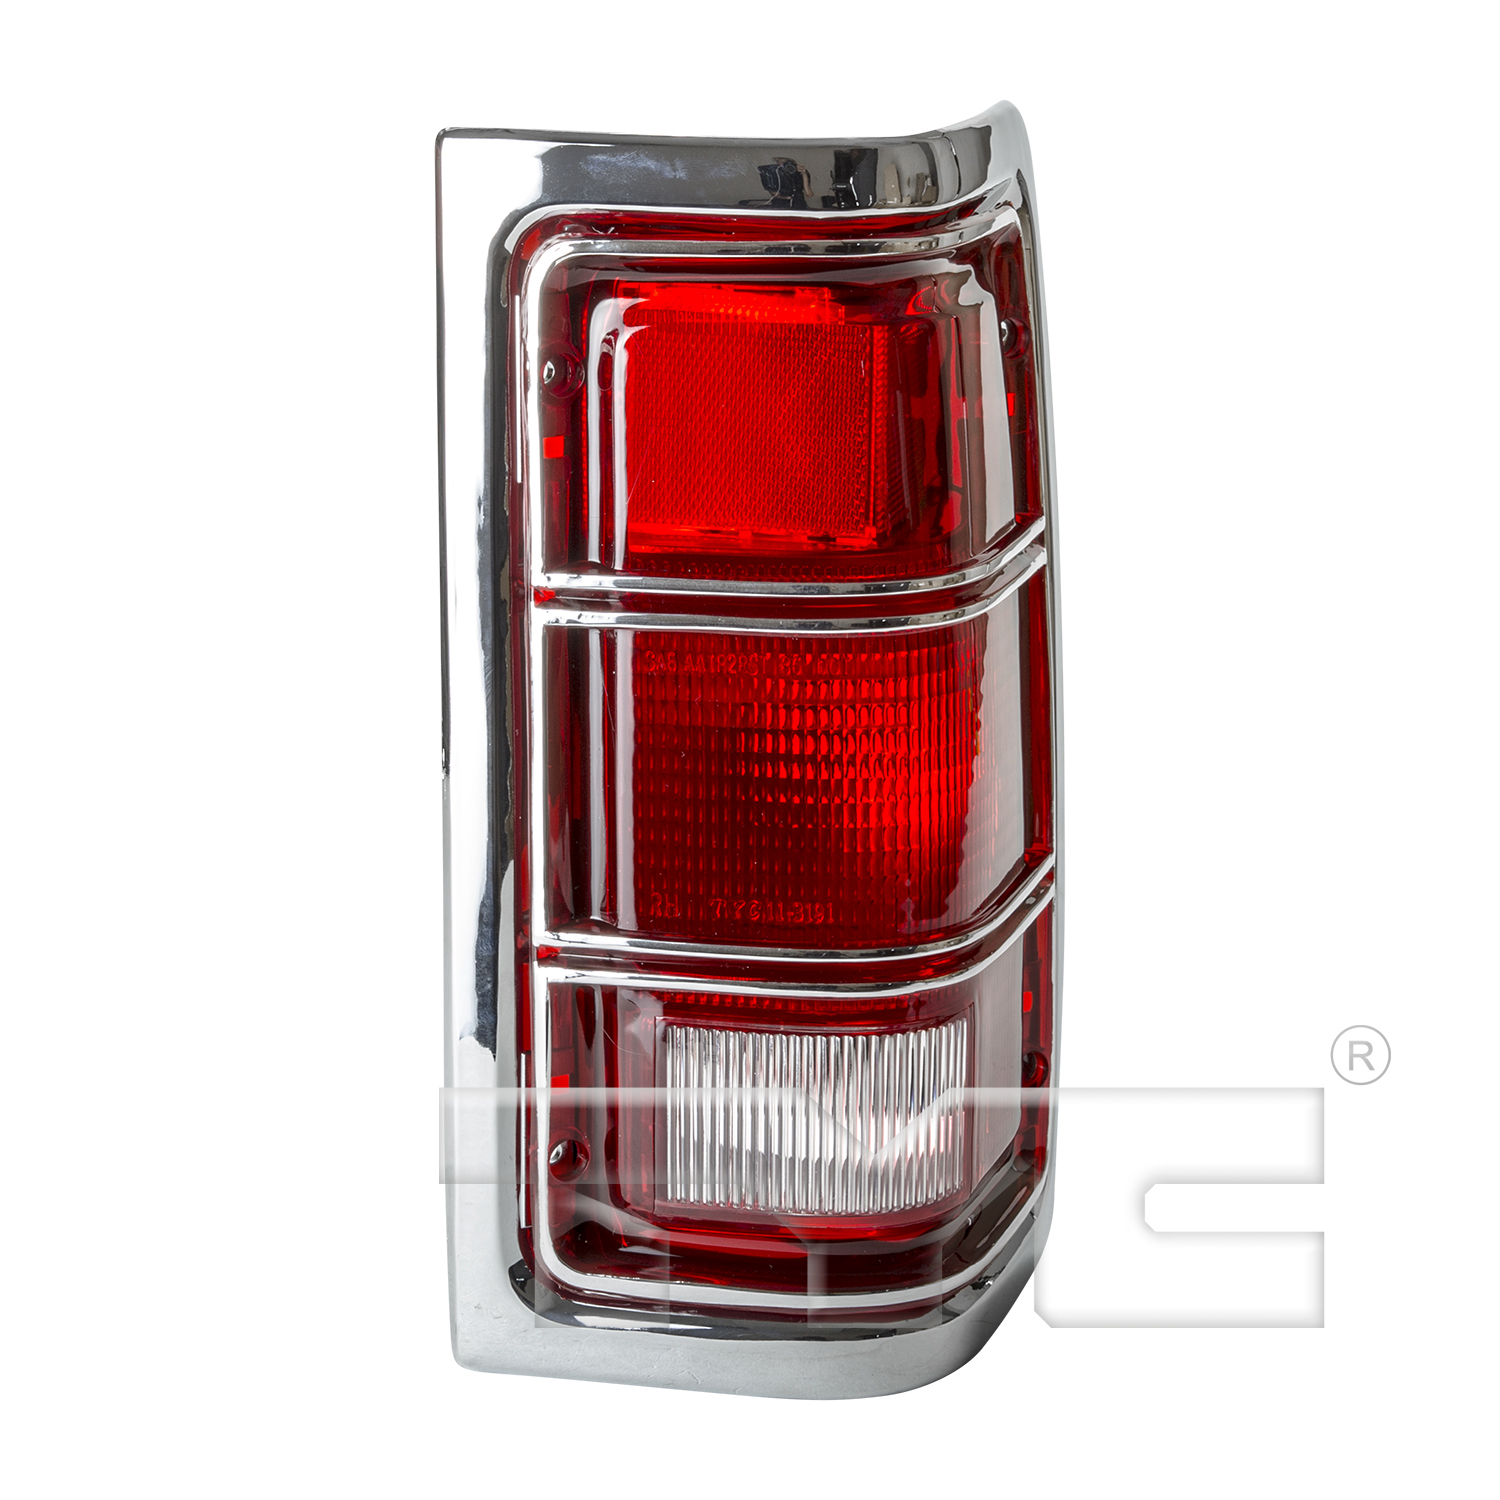 Aftermarket TAILLIGHTS for DODGE - D350, D350,81-87,RT Taillamp lens